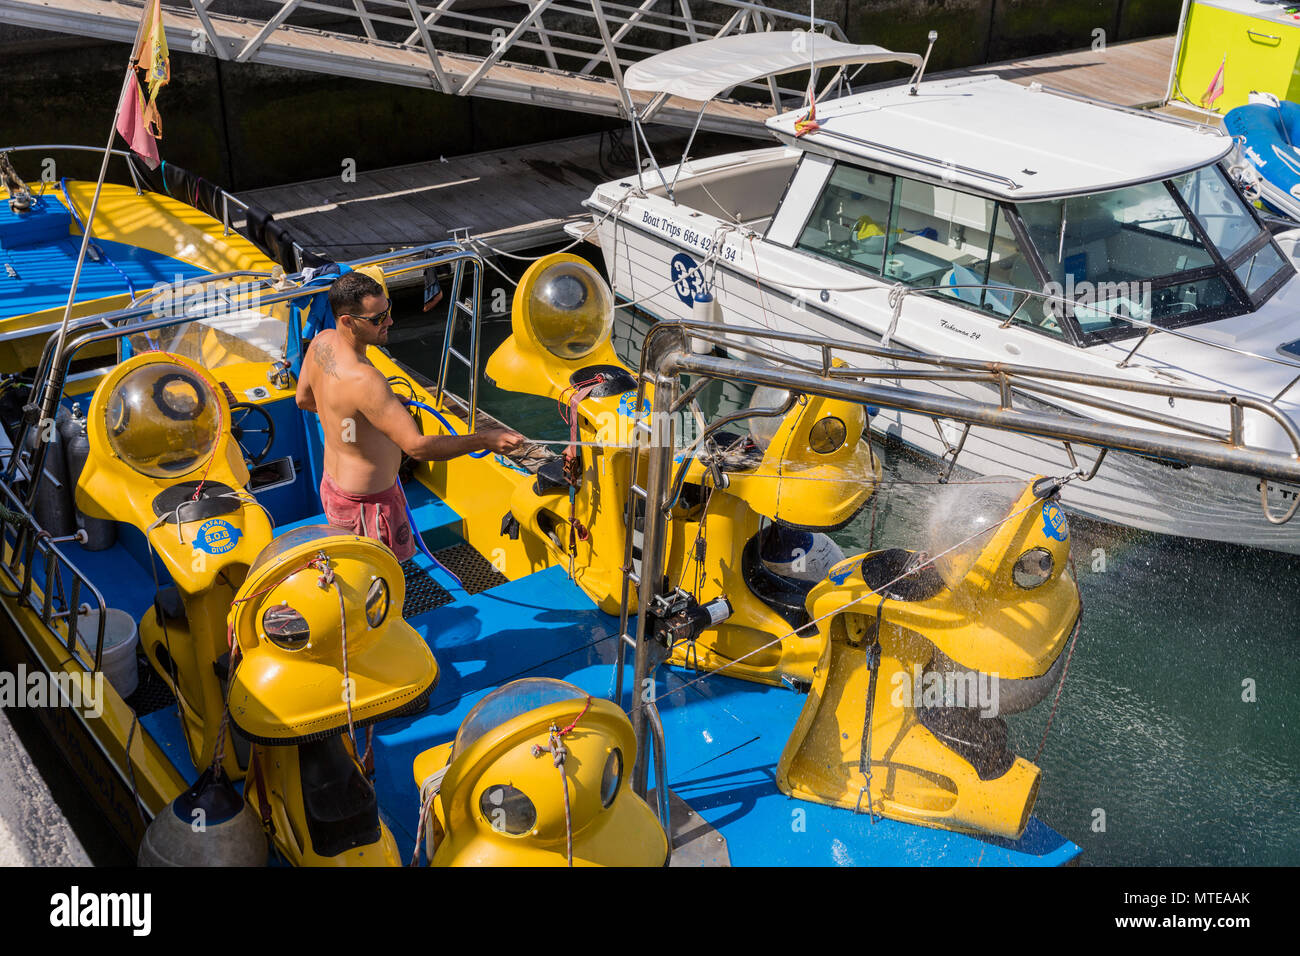 Man washing down BOB diving suits on a tour boat in Puerto Colon marina, Playa de Las Americas, Tenerife, Canary Islands, Spain Stock Photo